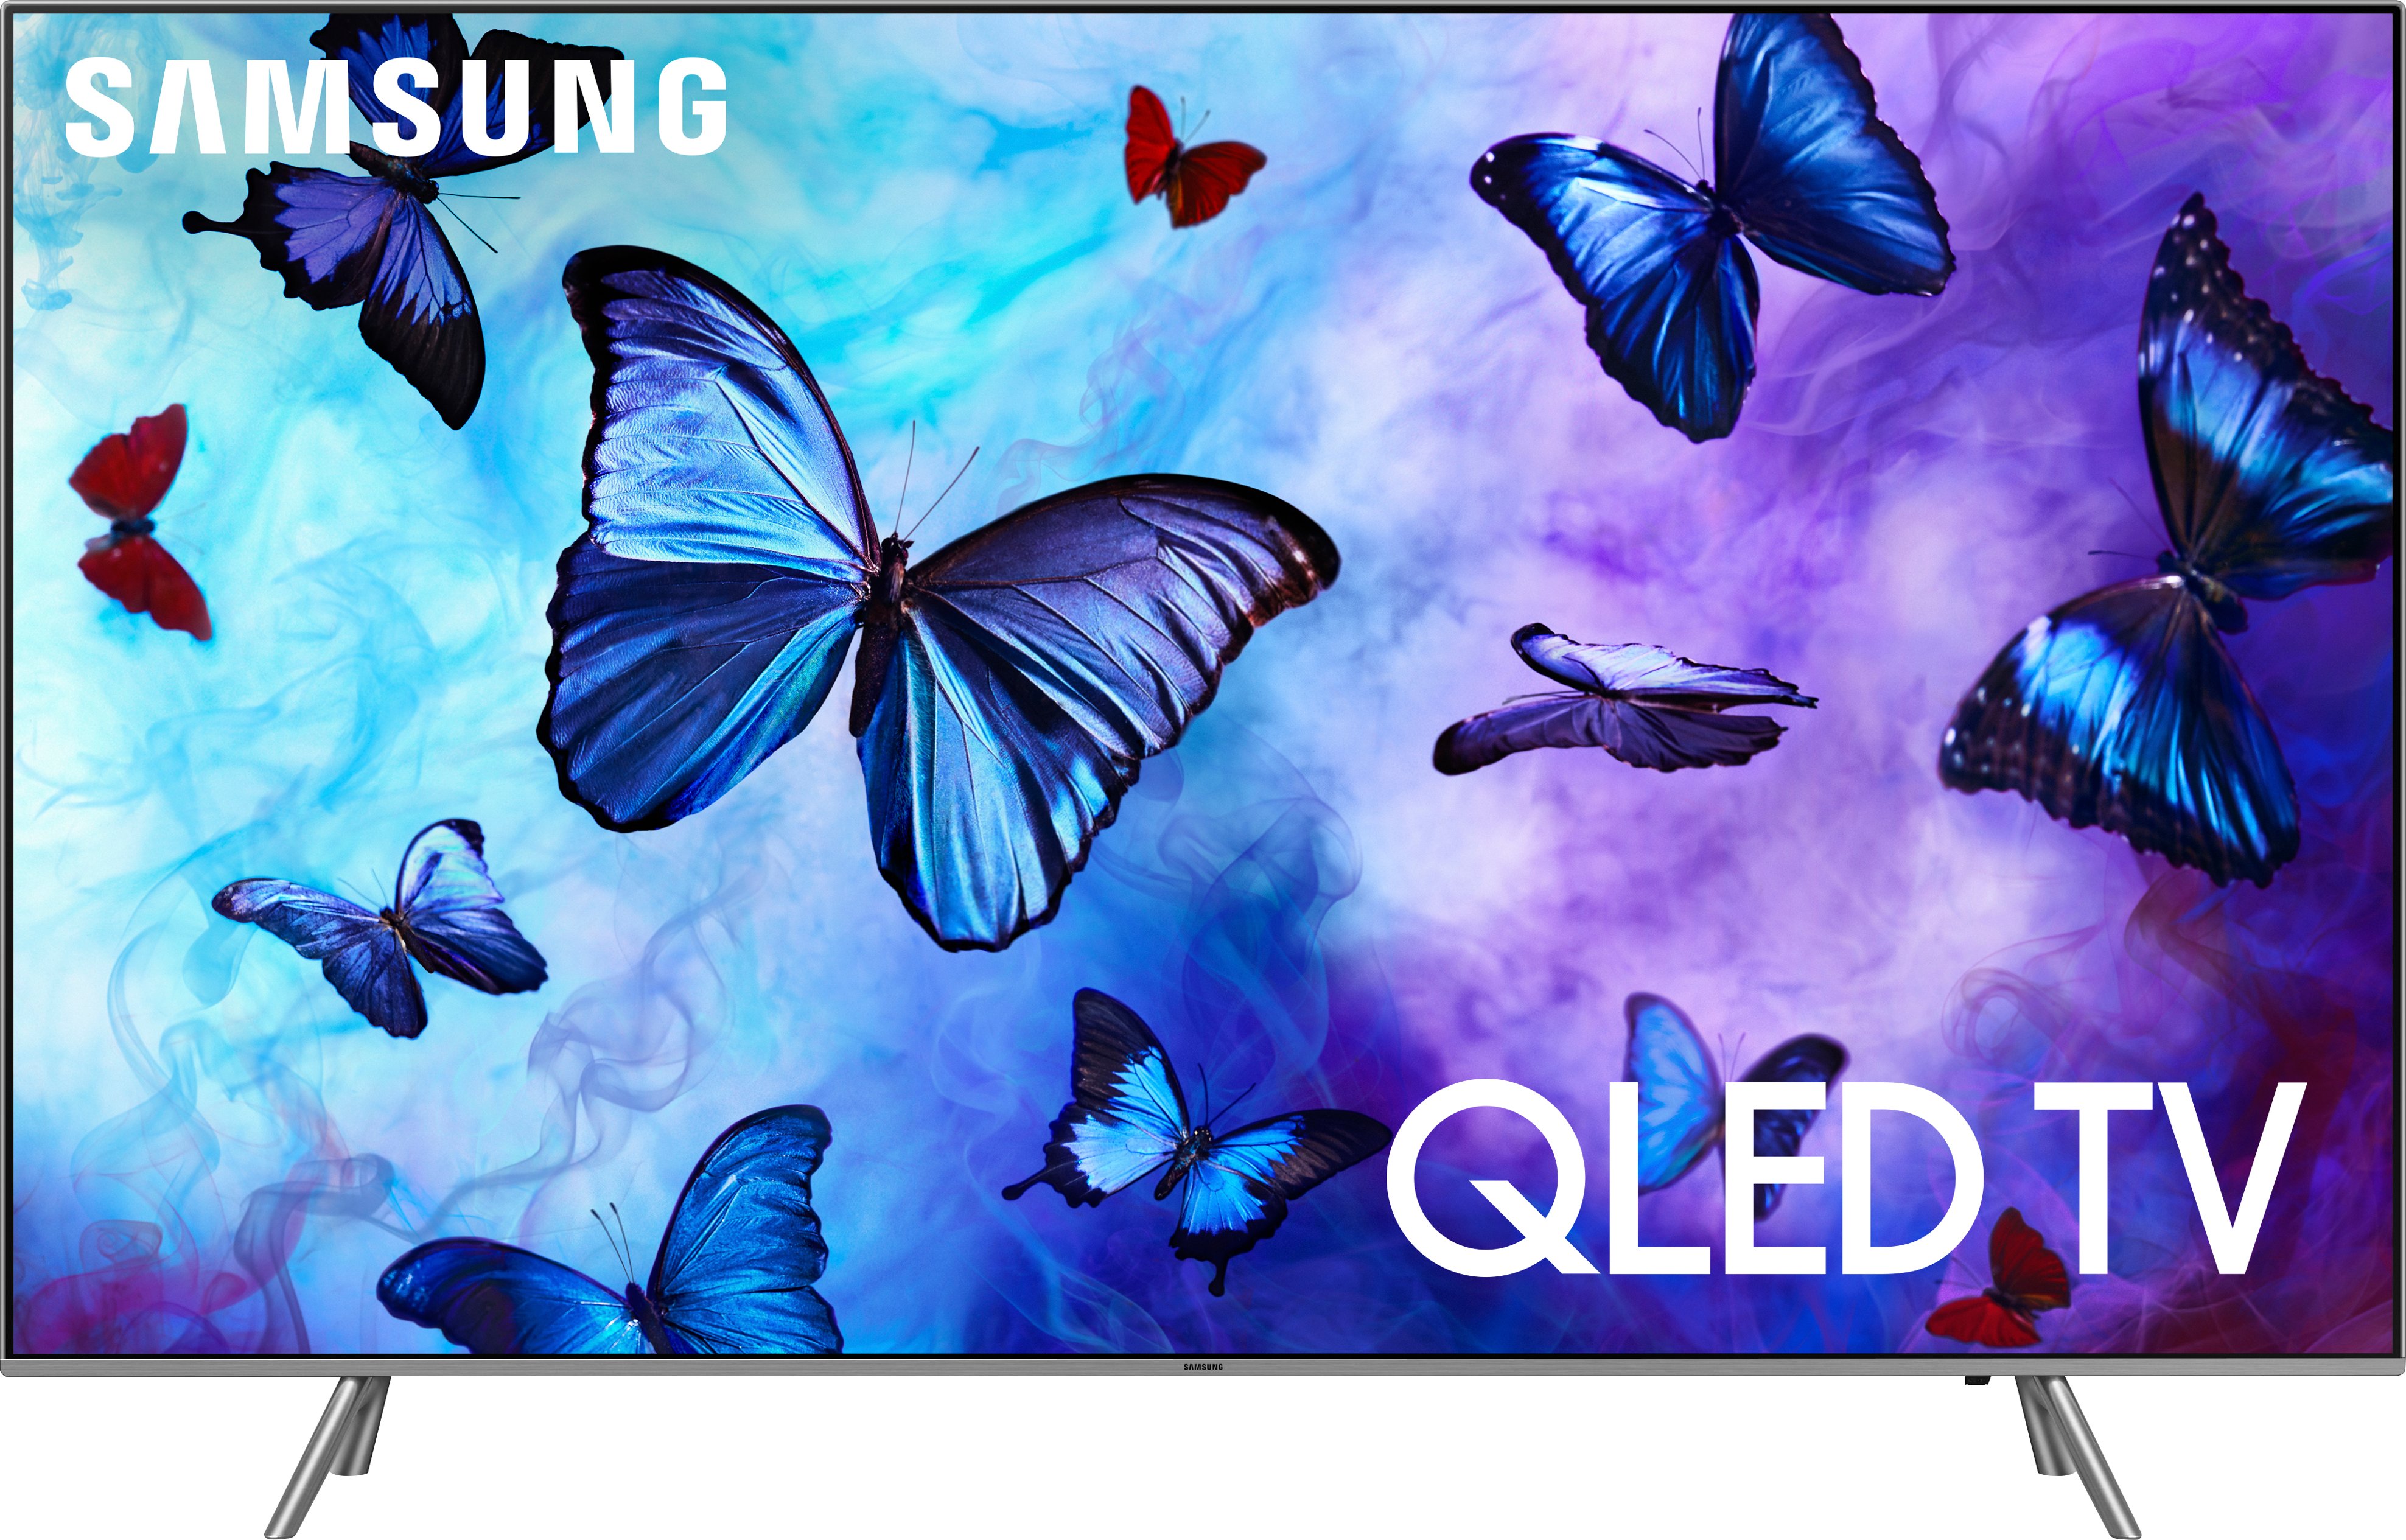 Samsung 82" Class LED Q6F 2160p 4K UHD TV with HDR - Best Buy